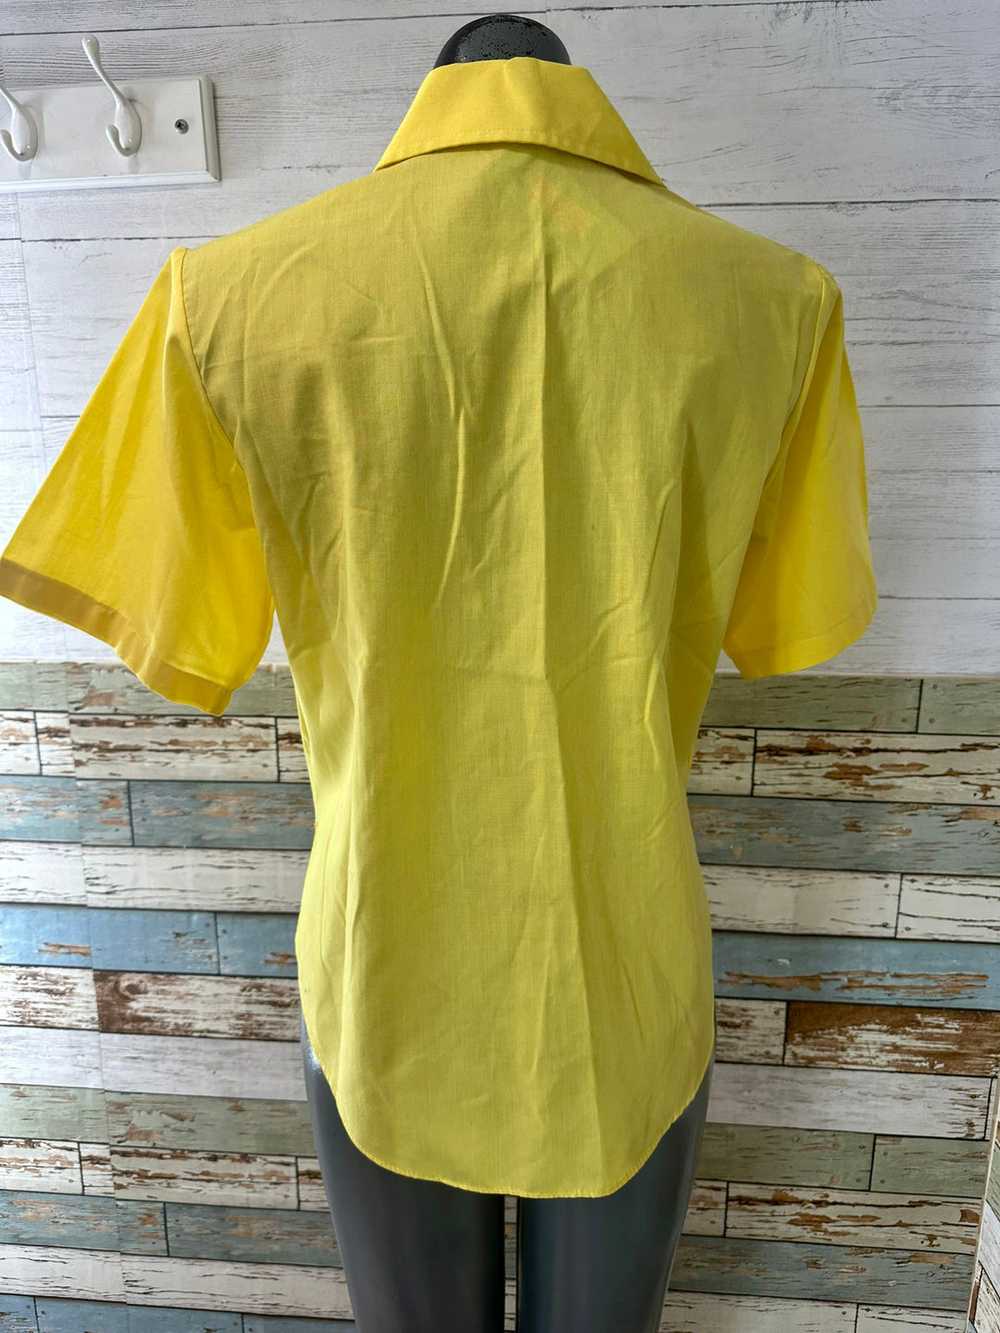 70’s Yellow Short Sleeve Shirt With Panels - image 5